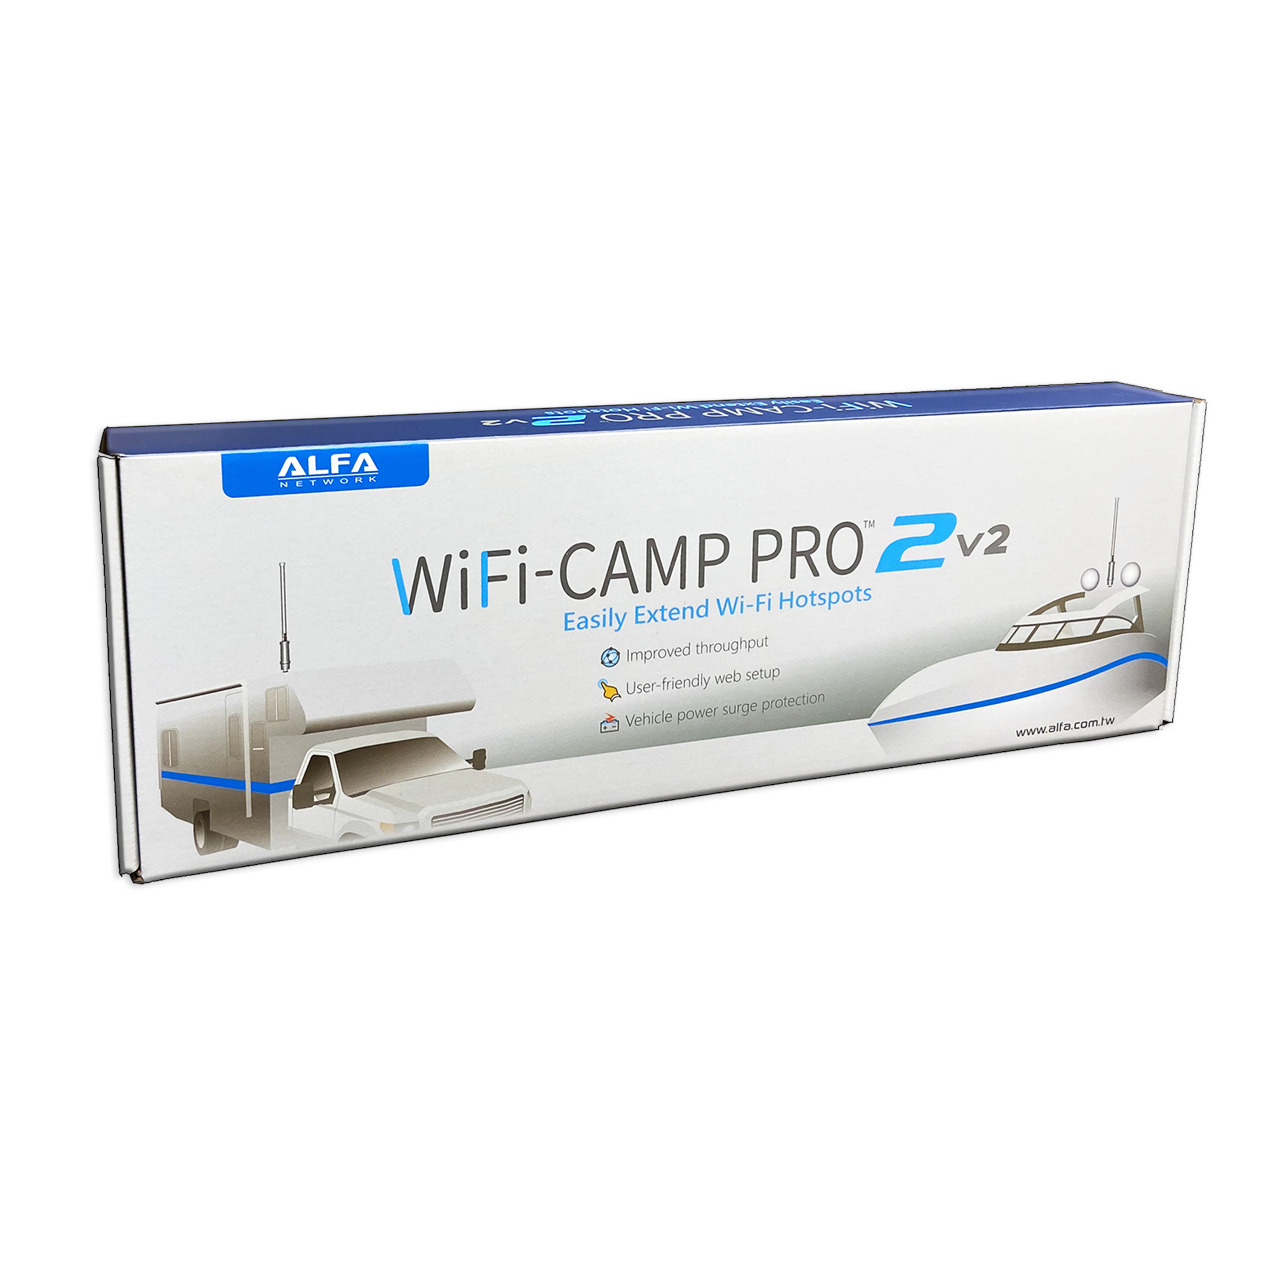 Alfa WiFi Camp Pro 2 v2 long range WiFi repeater kit R36A +Antenna Campground RV